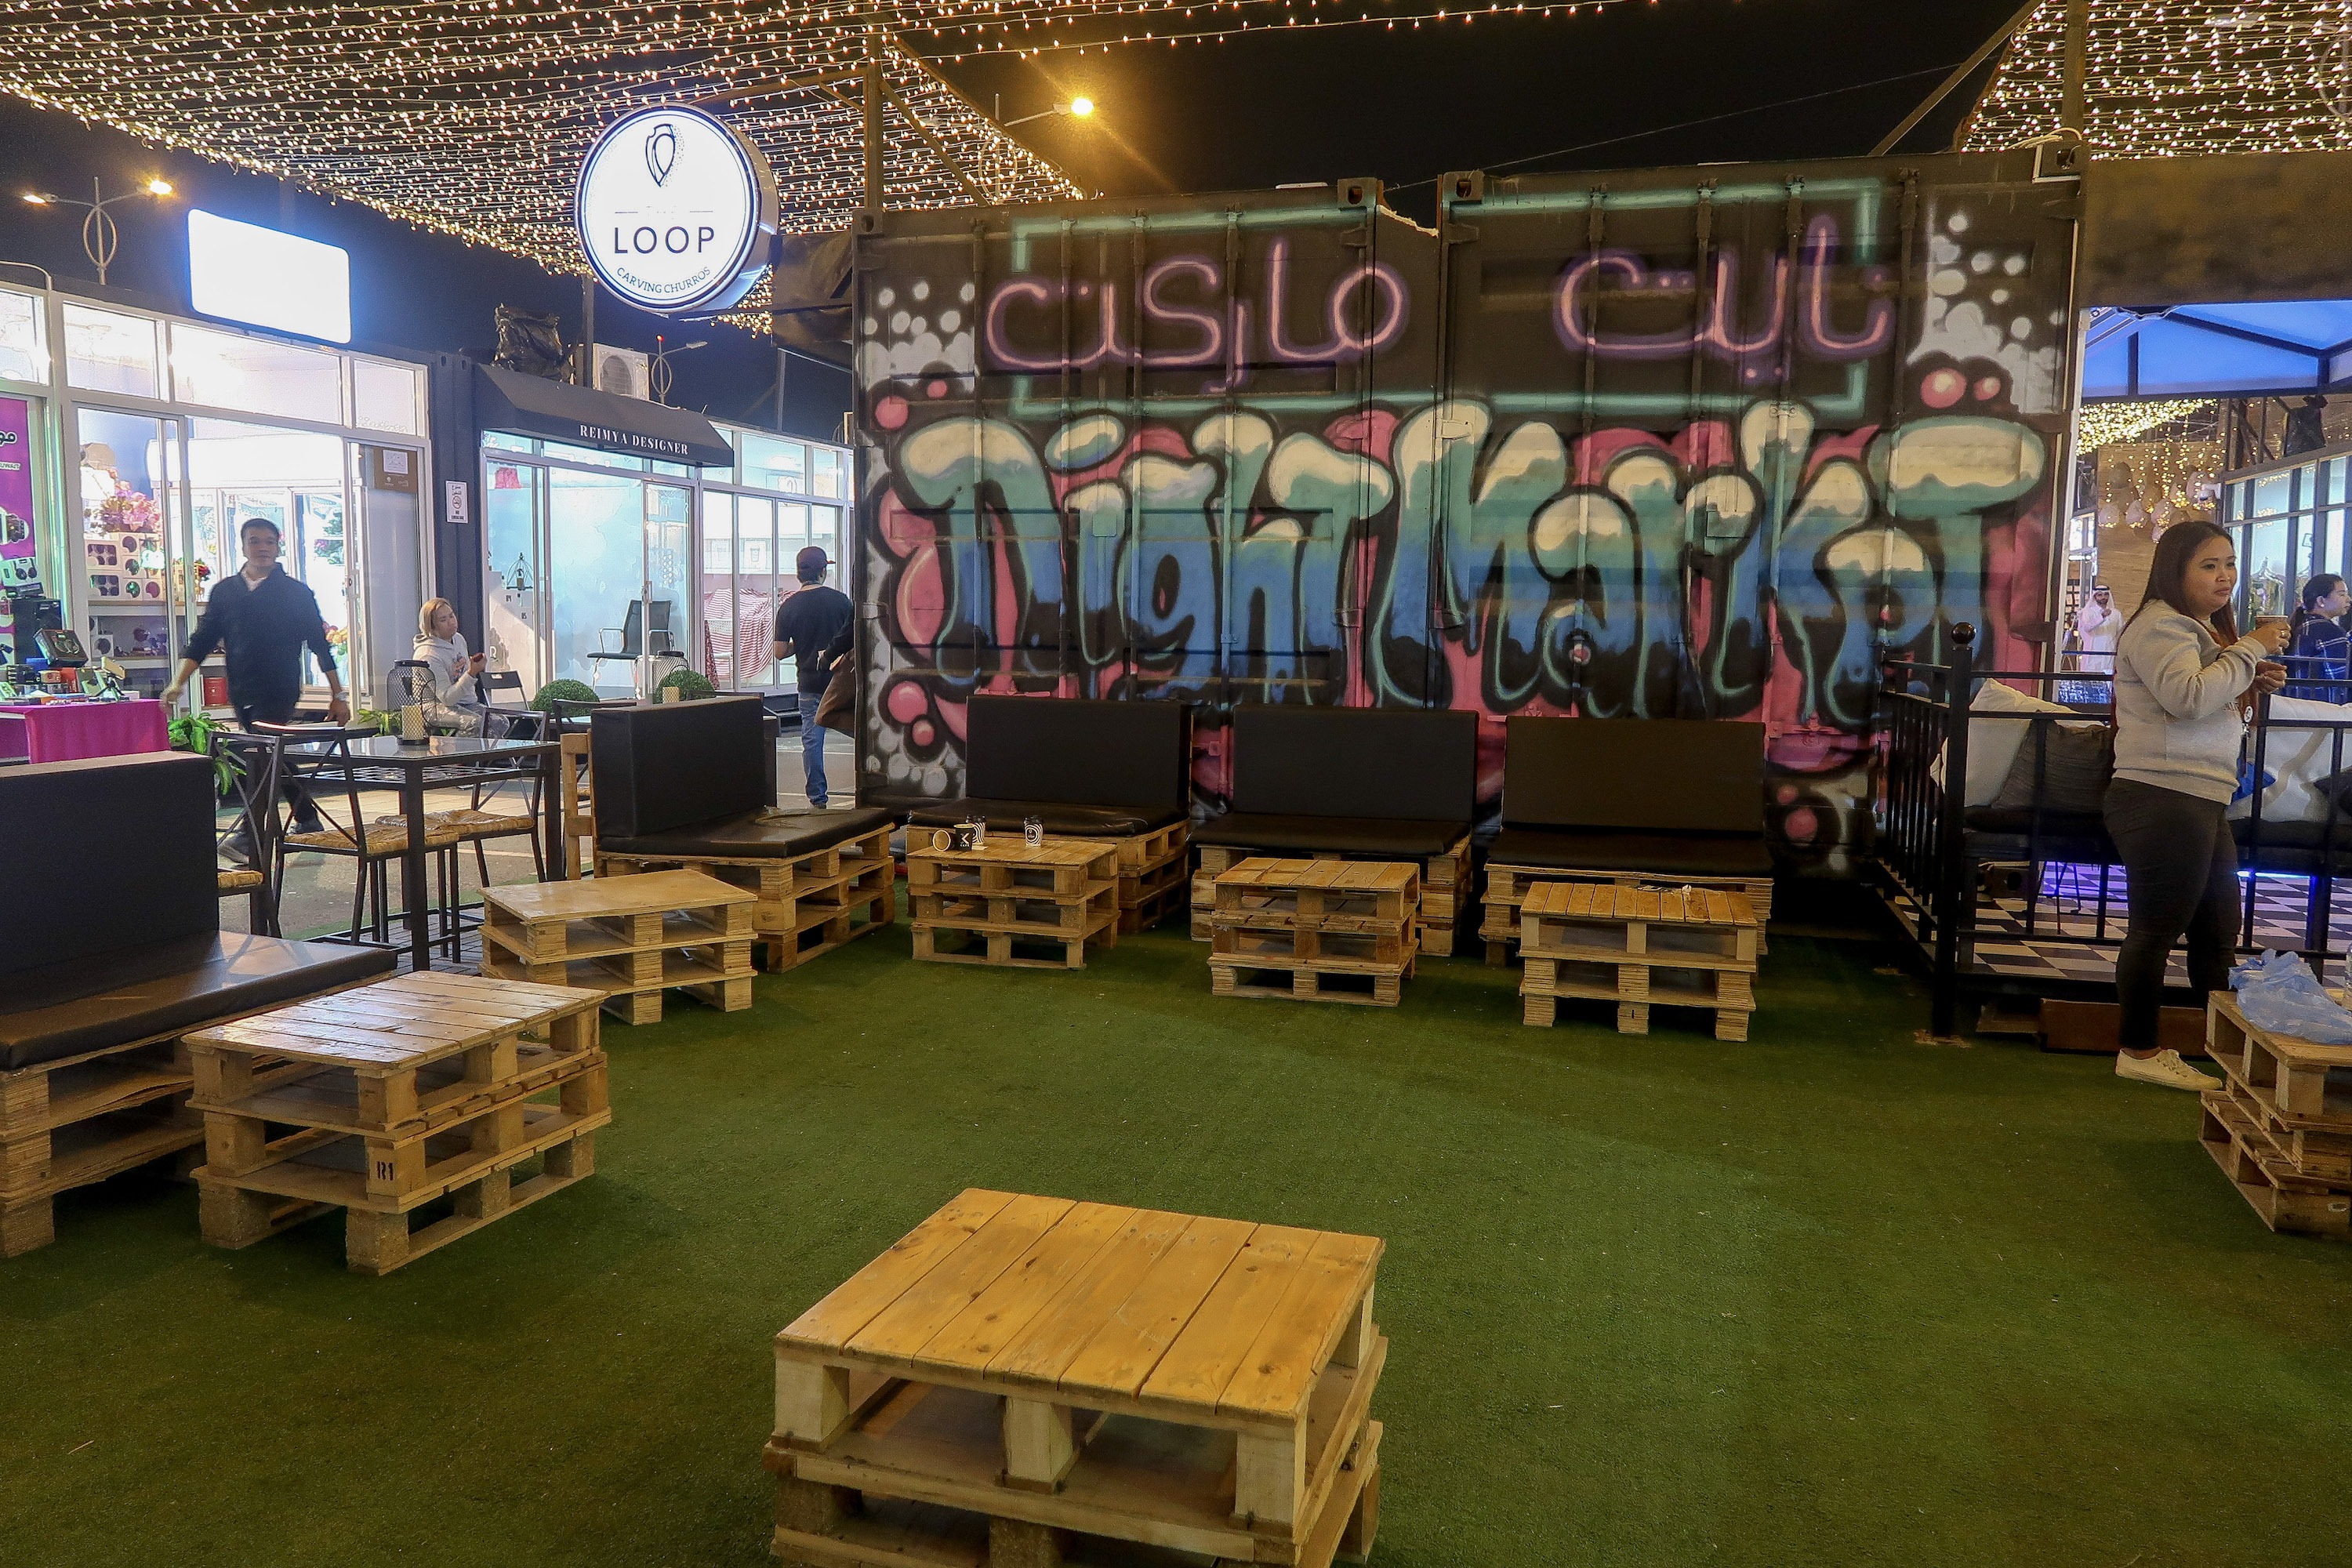 Night Market Container Park | Visit Qatar | Doha, the capital of Qatar is located in the Middle East and the World Cup 2022 location. Find out how I spent 4 days on my visit to Qatar | Travel Guide & Tips | Elle Blonde Luxury Lifestyle Destination Blog